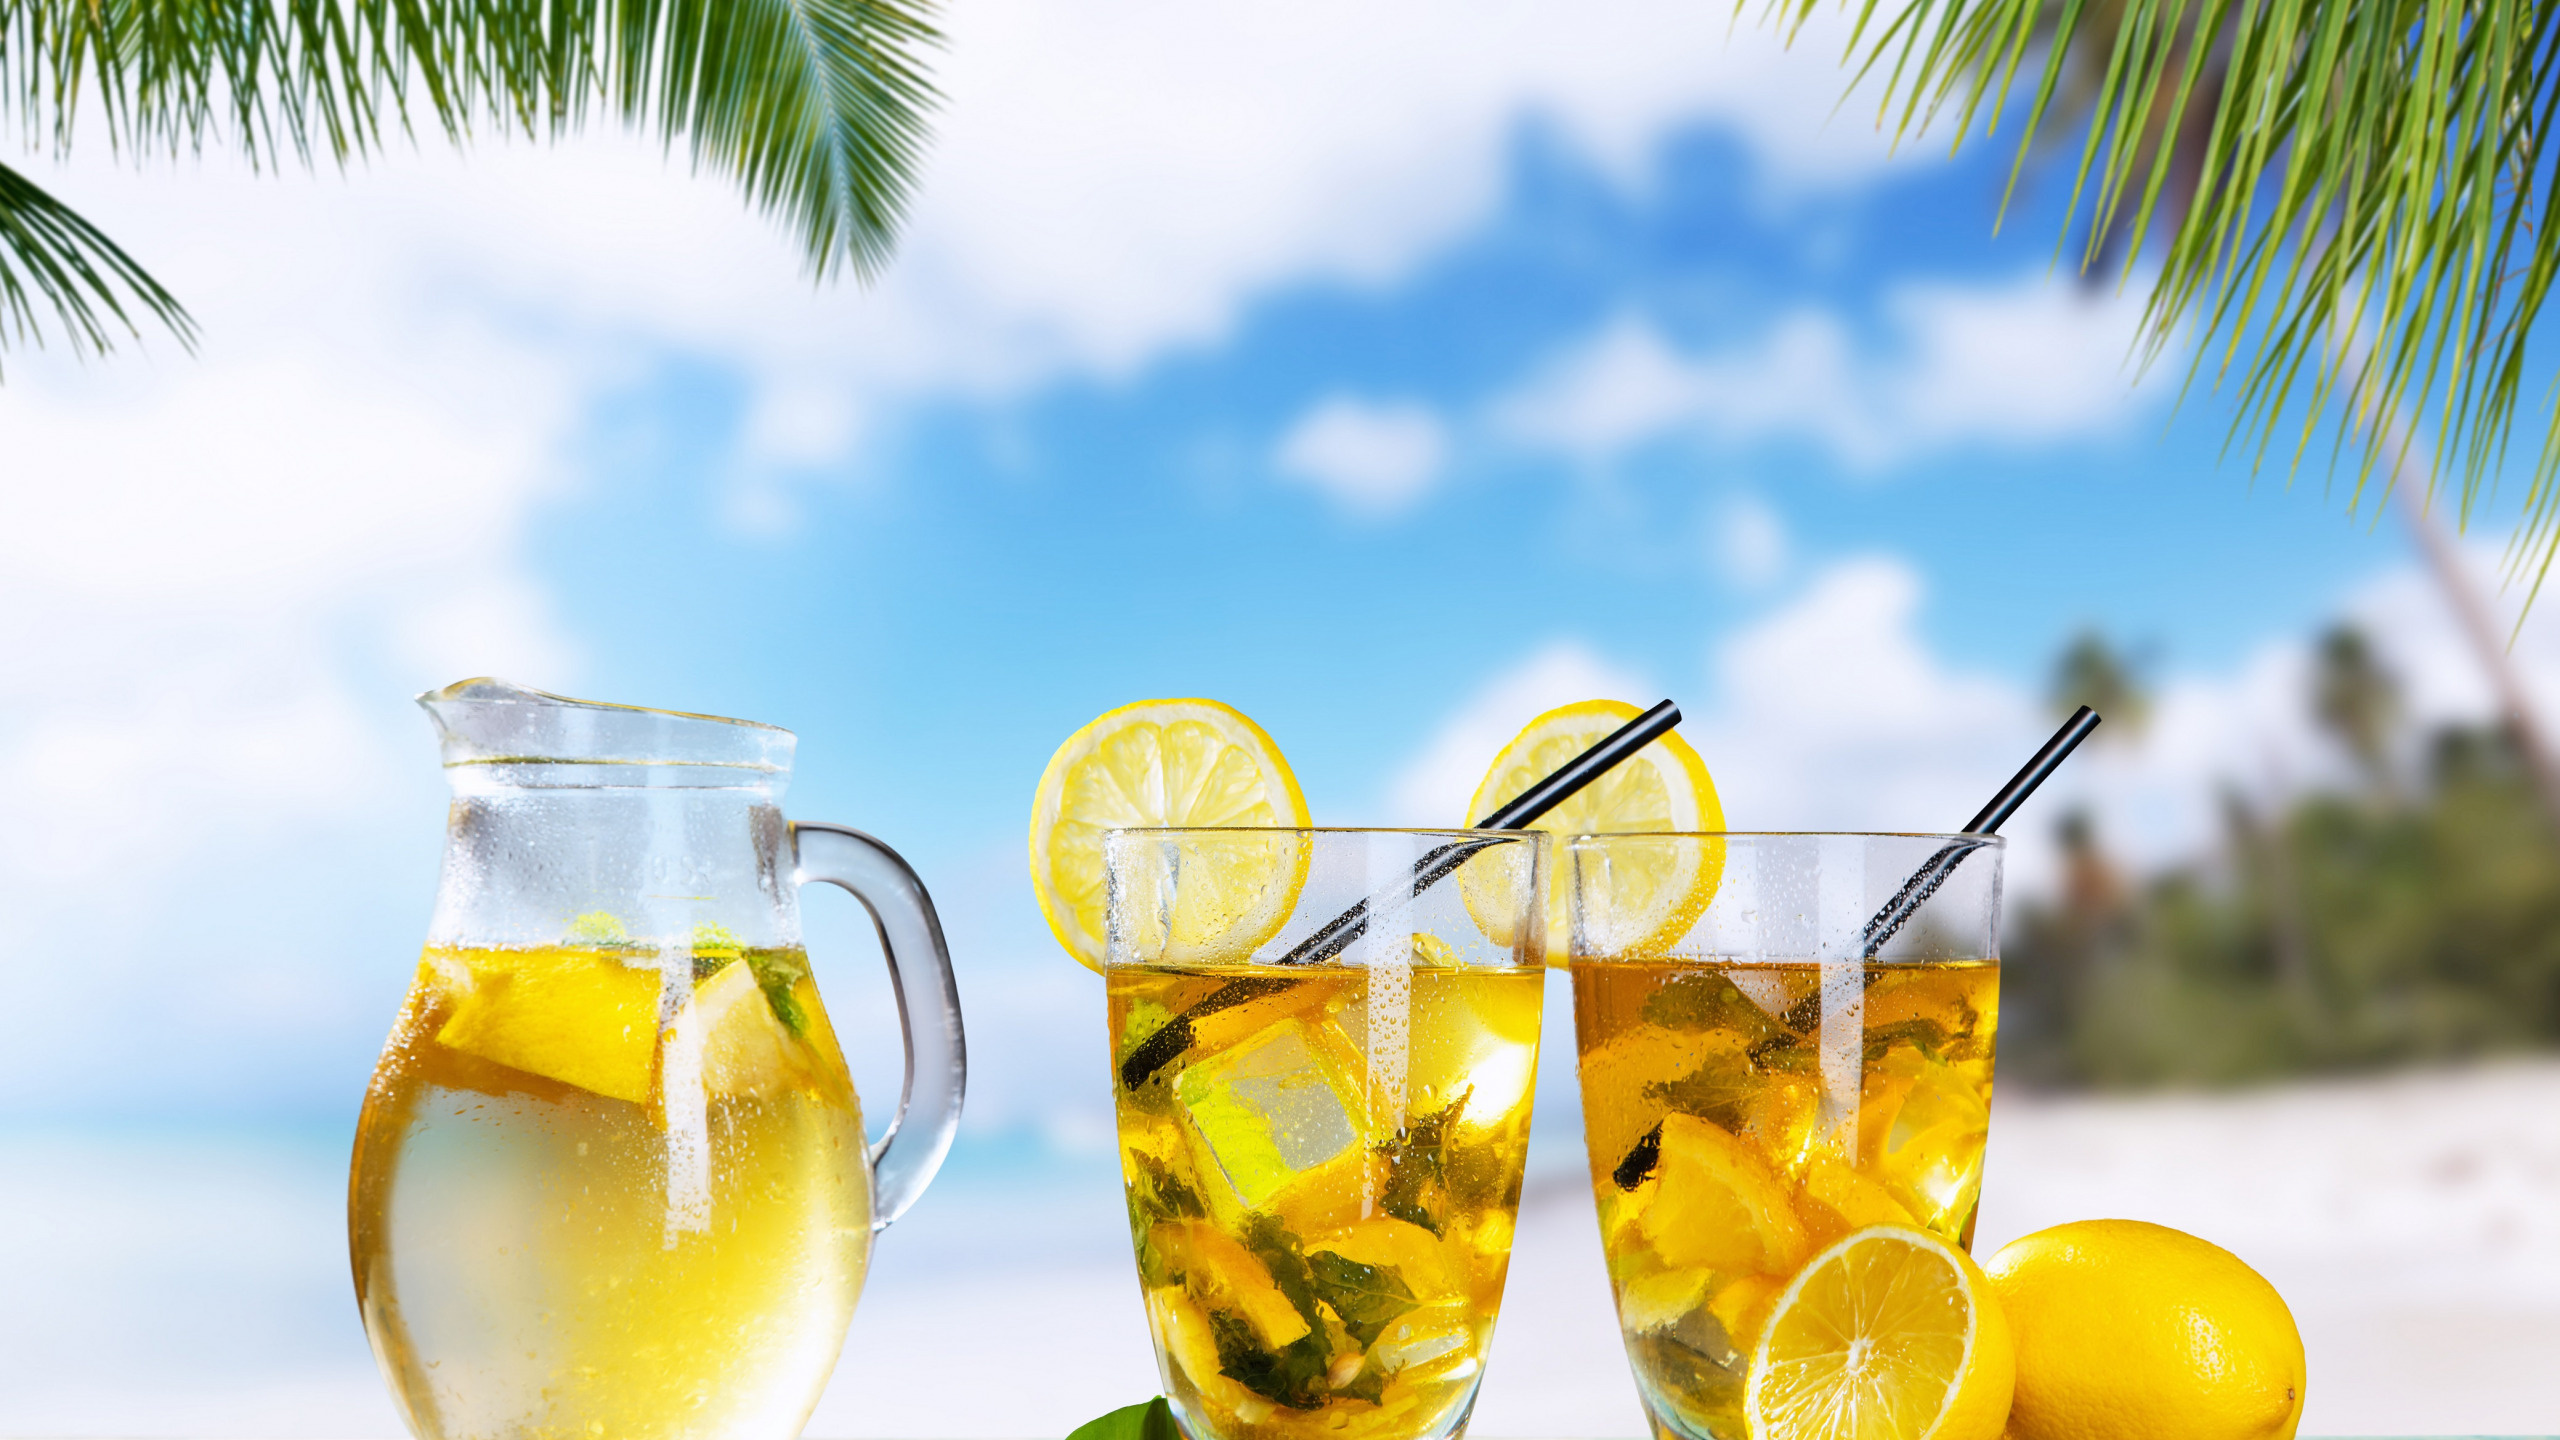 Lemonade: Used for centuries as a natural remedy for sore throats and coughs. 2560x1440 HD Background.